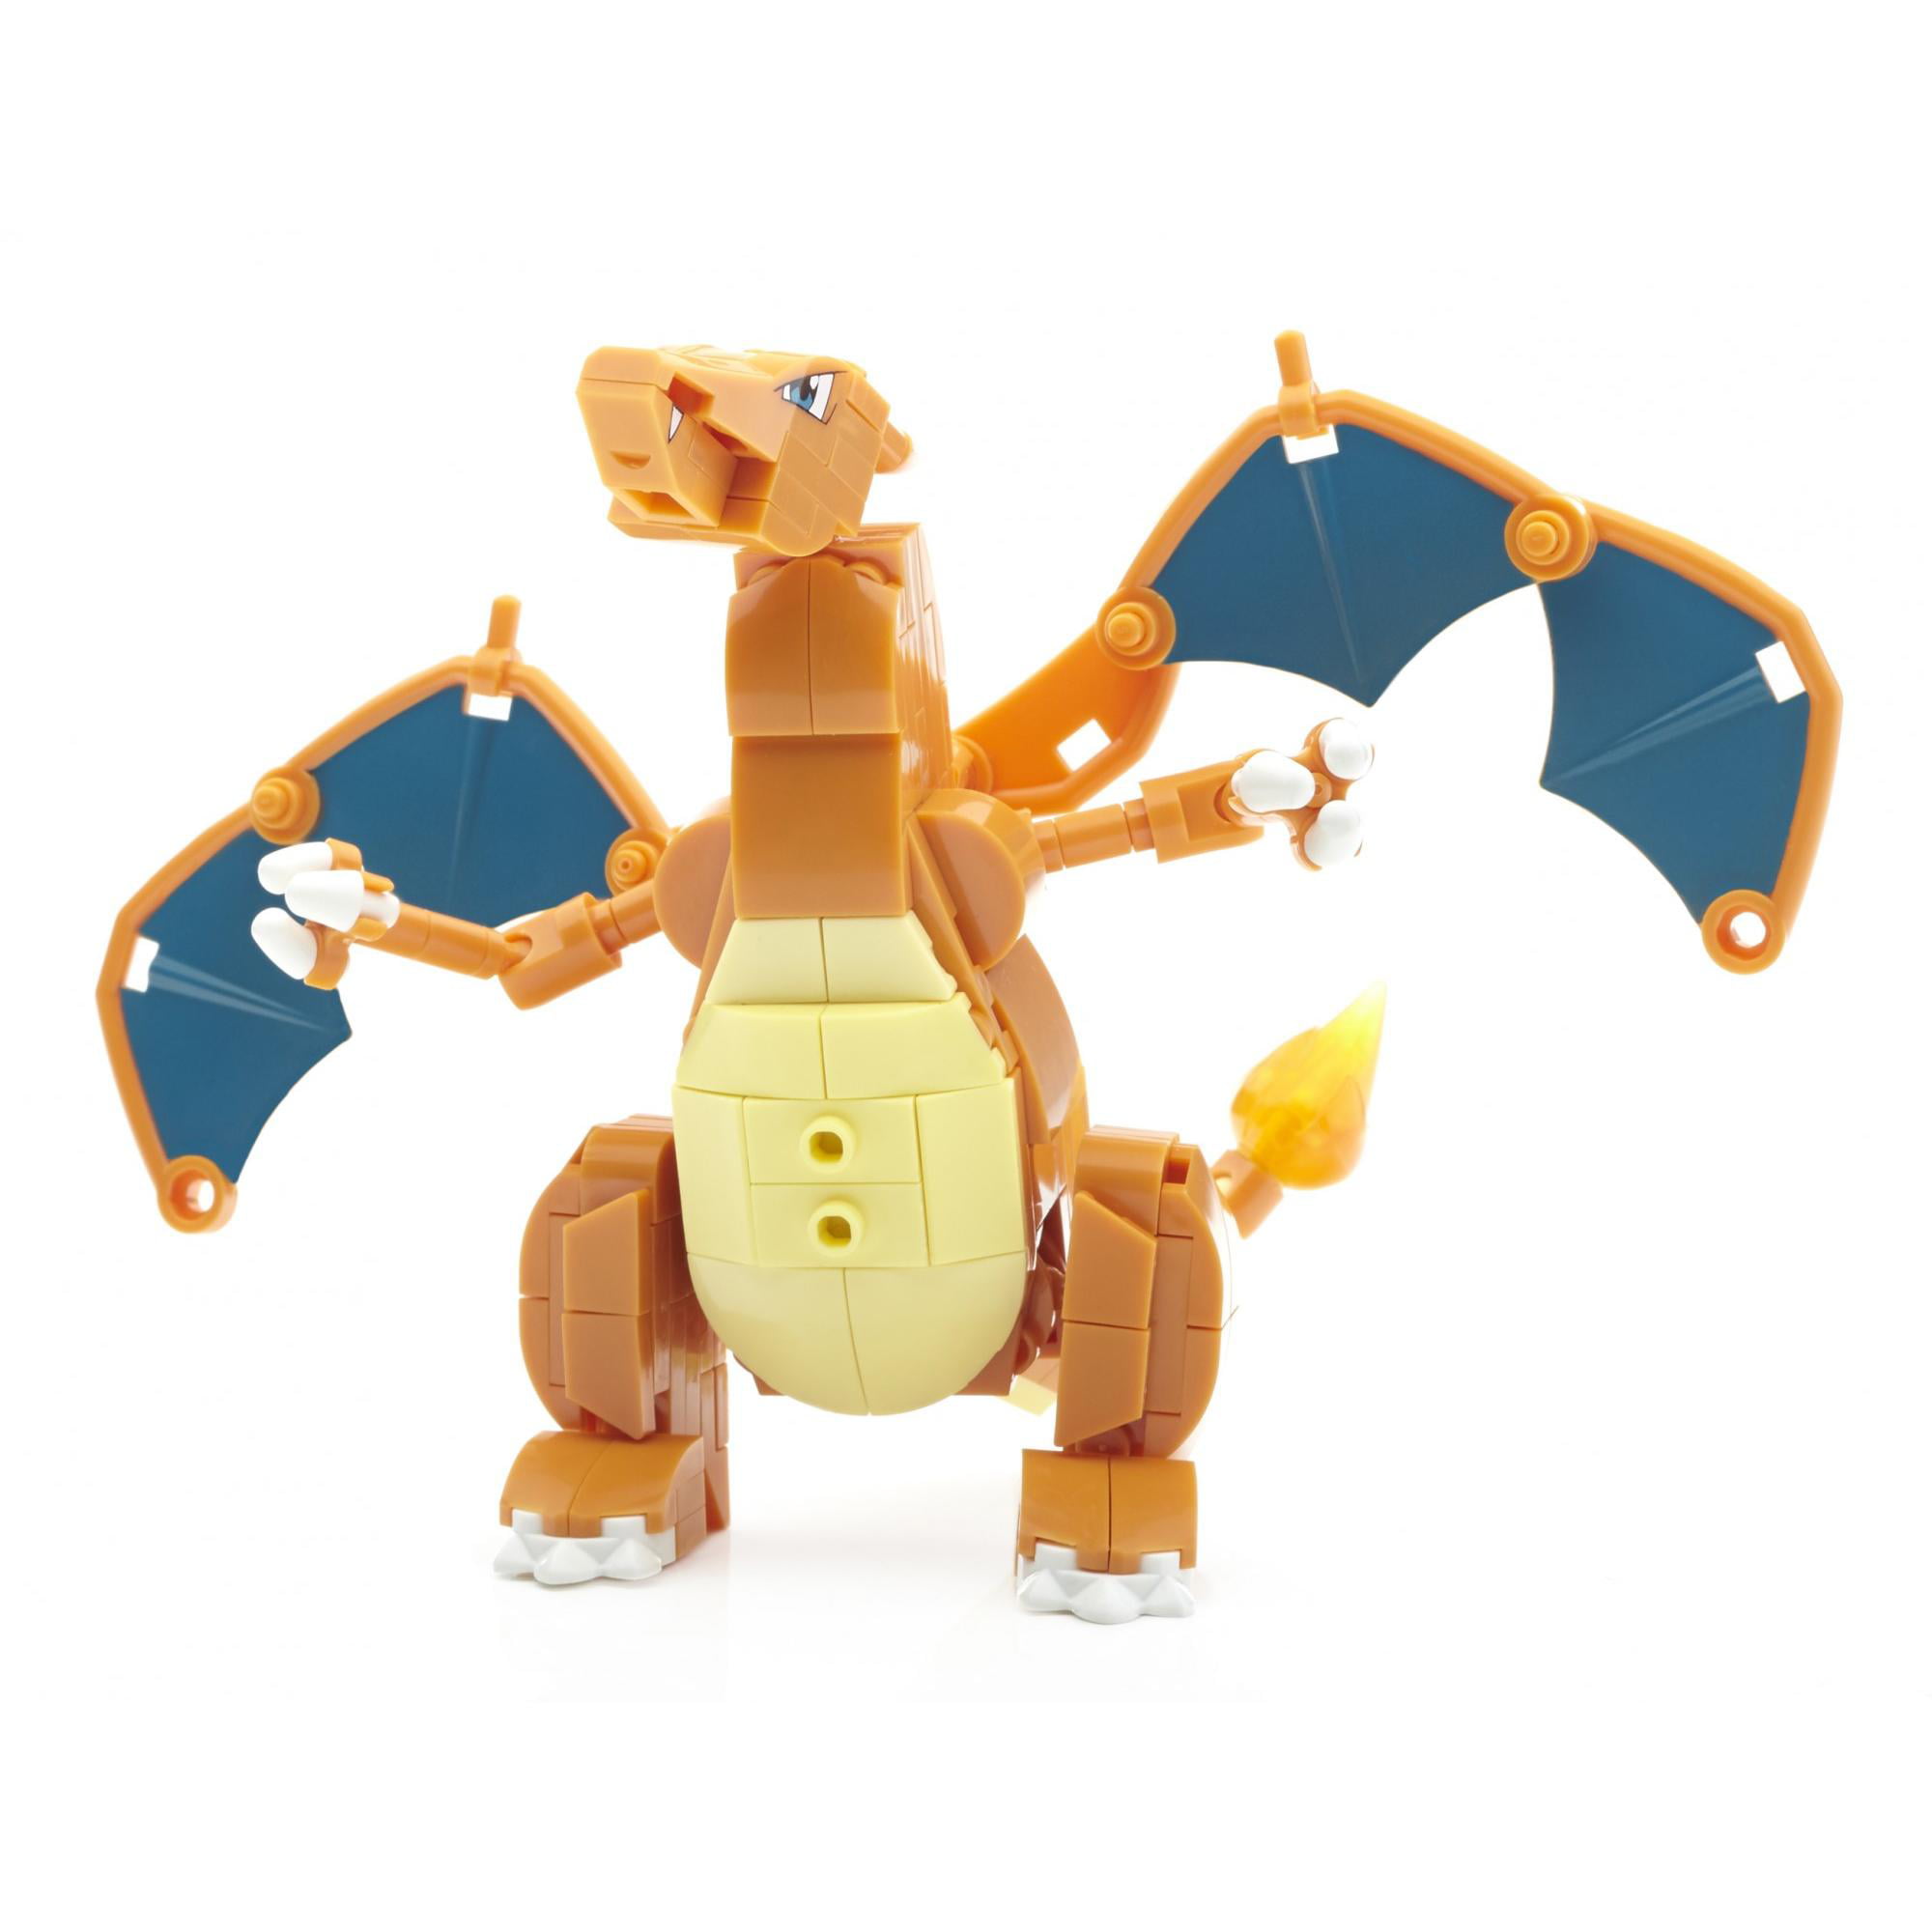 Mega Construx Pokemon Charizard Construction Set with character figures,  Building Toys for Kids (198 Pieces)